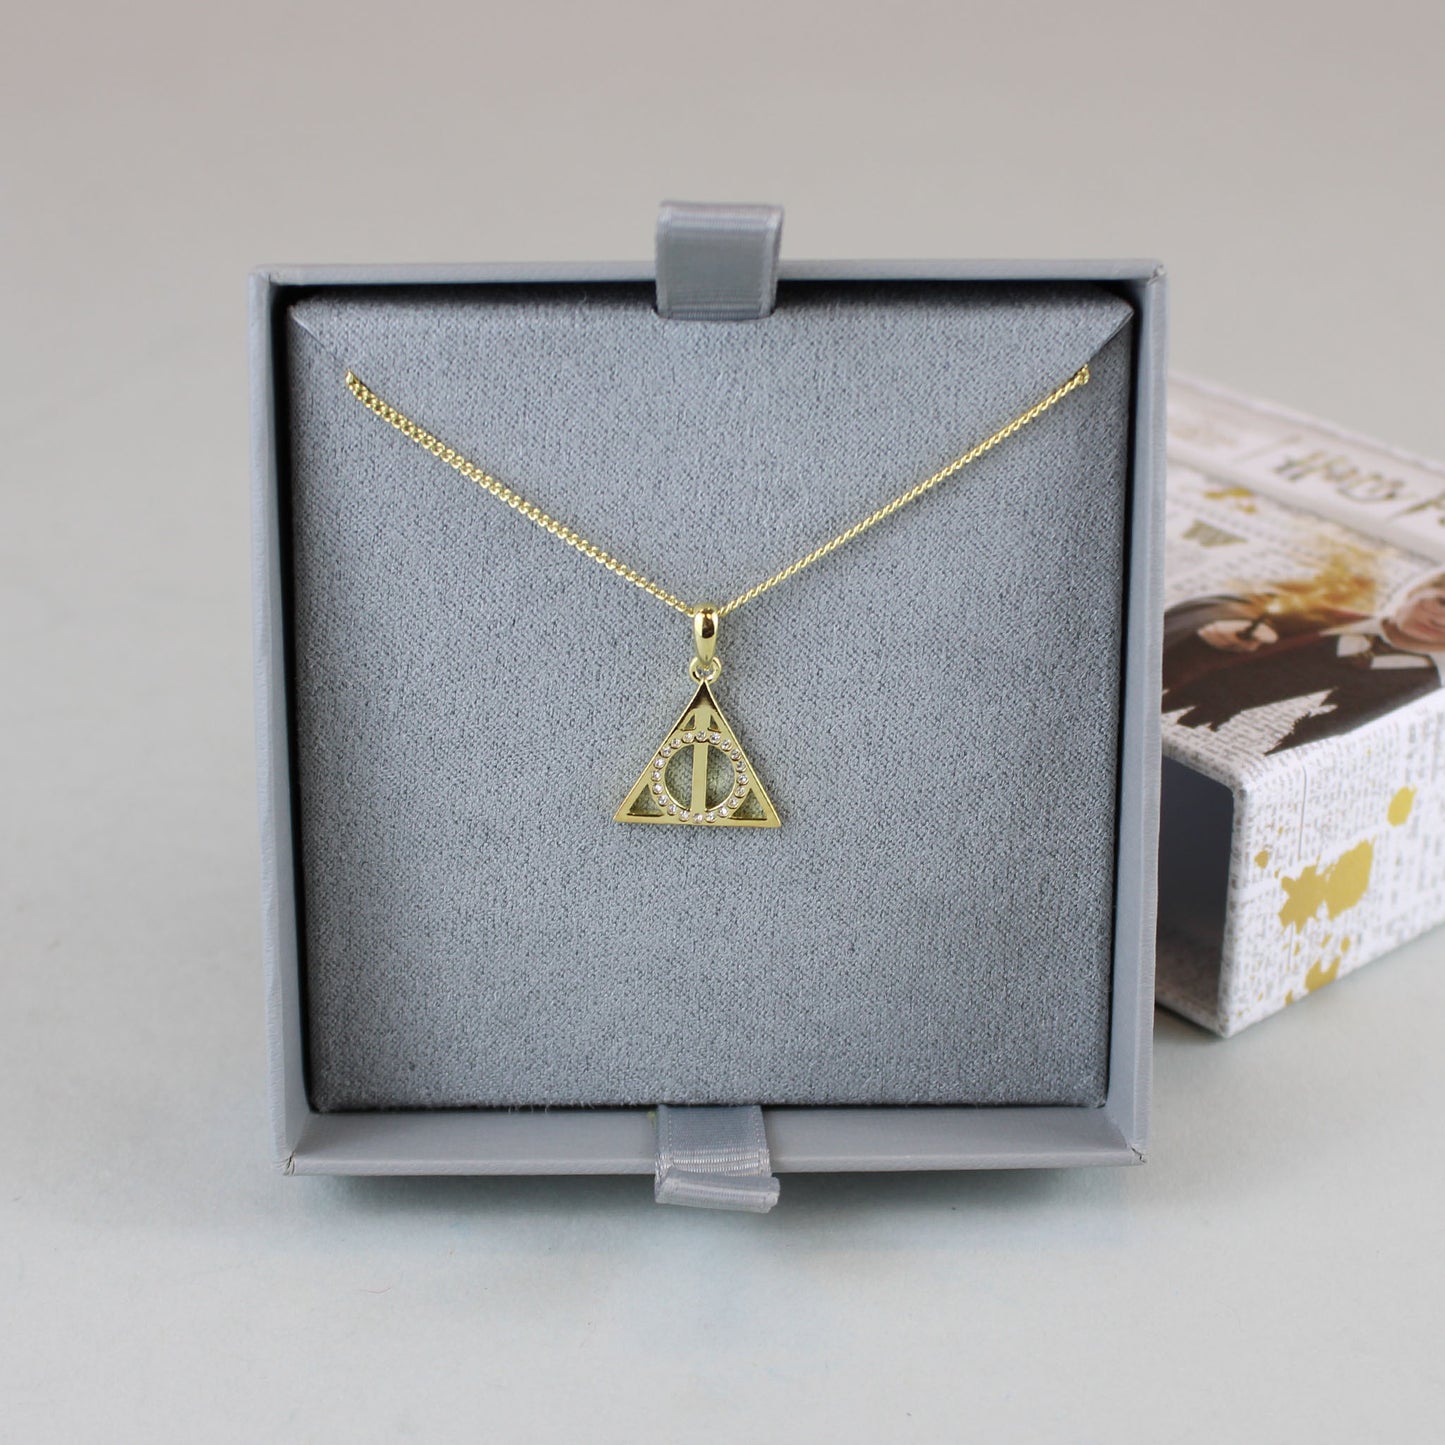 Harry Potter Deathly Hallows Necklace | Nerdom, Greece